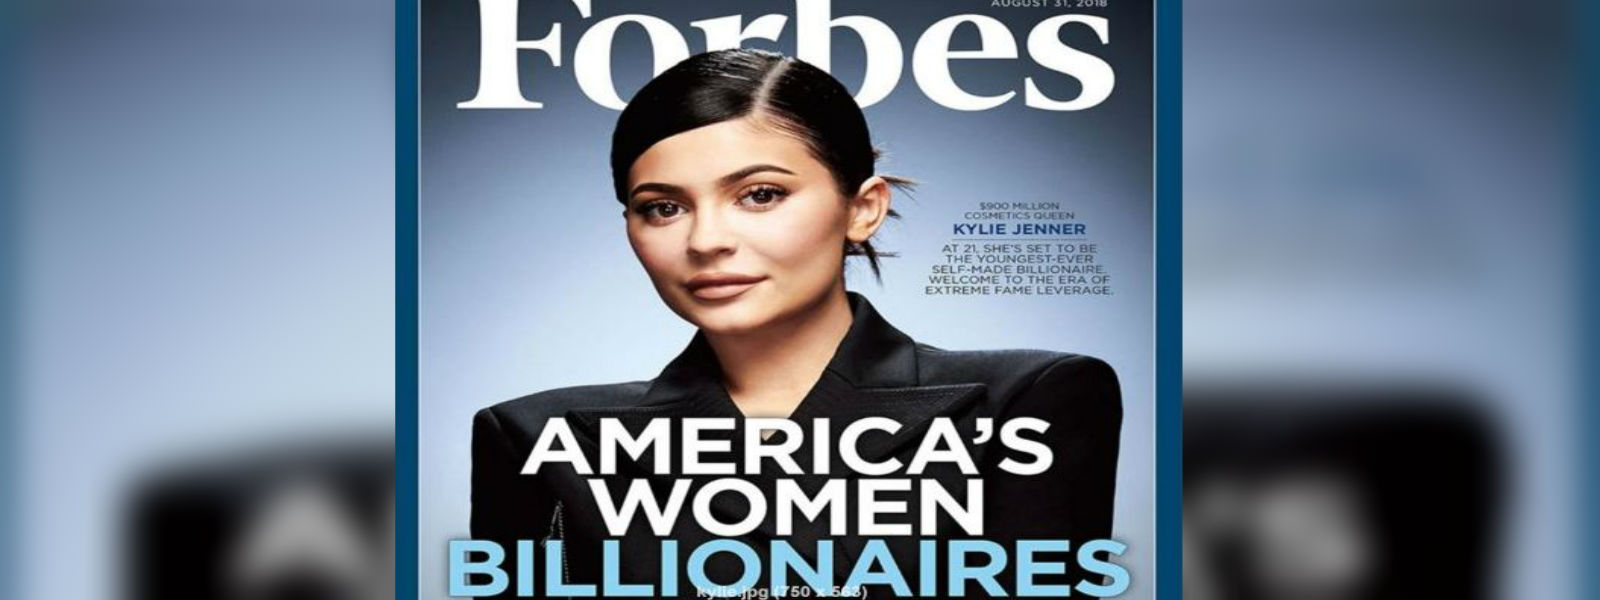 Kylie to be world's youngest self-made billionaire